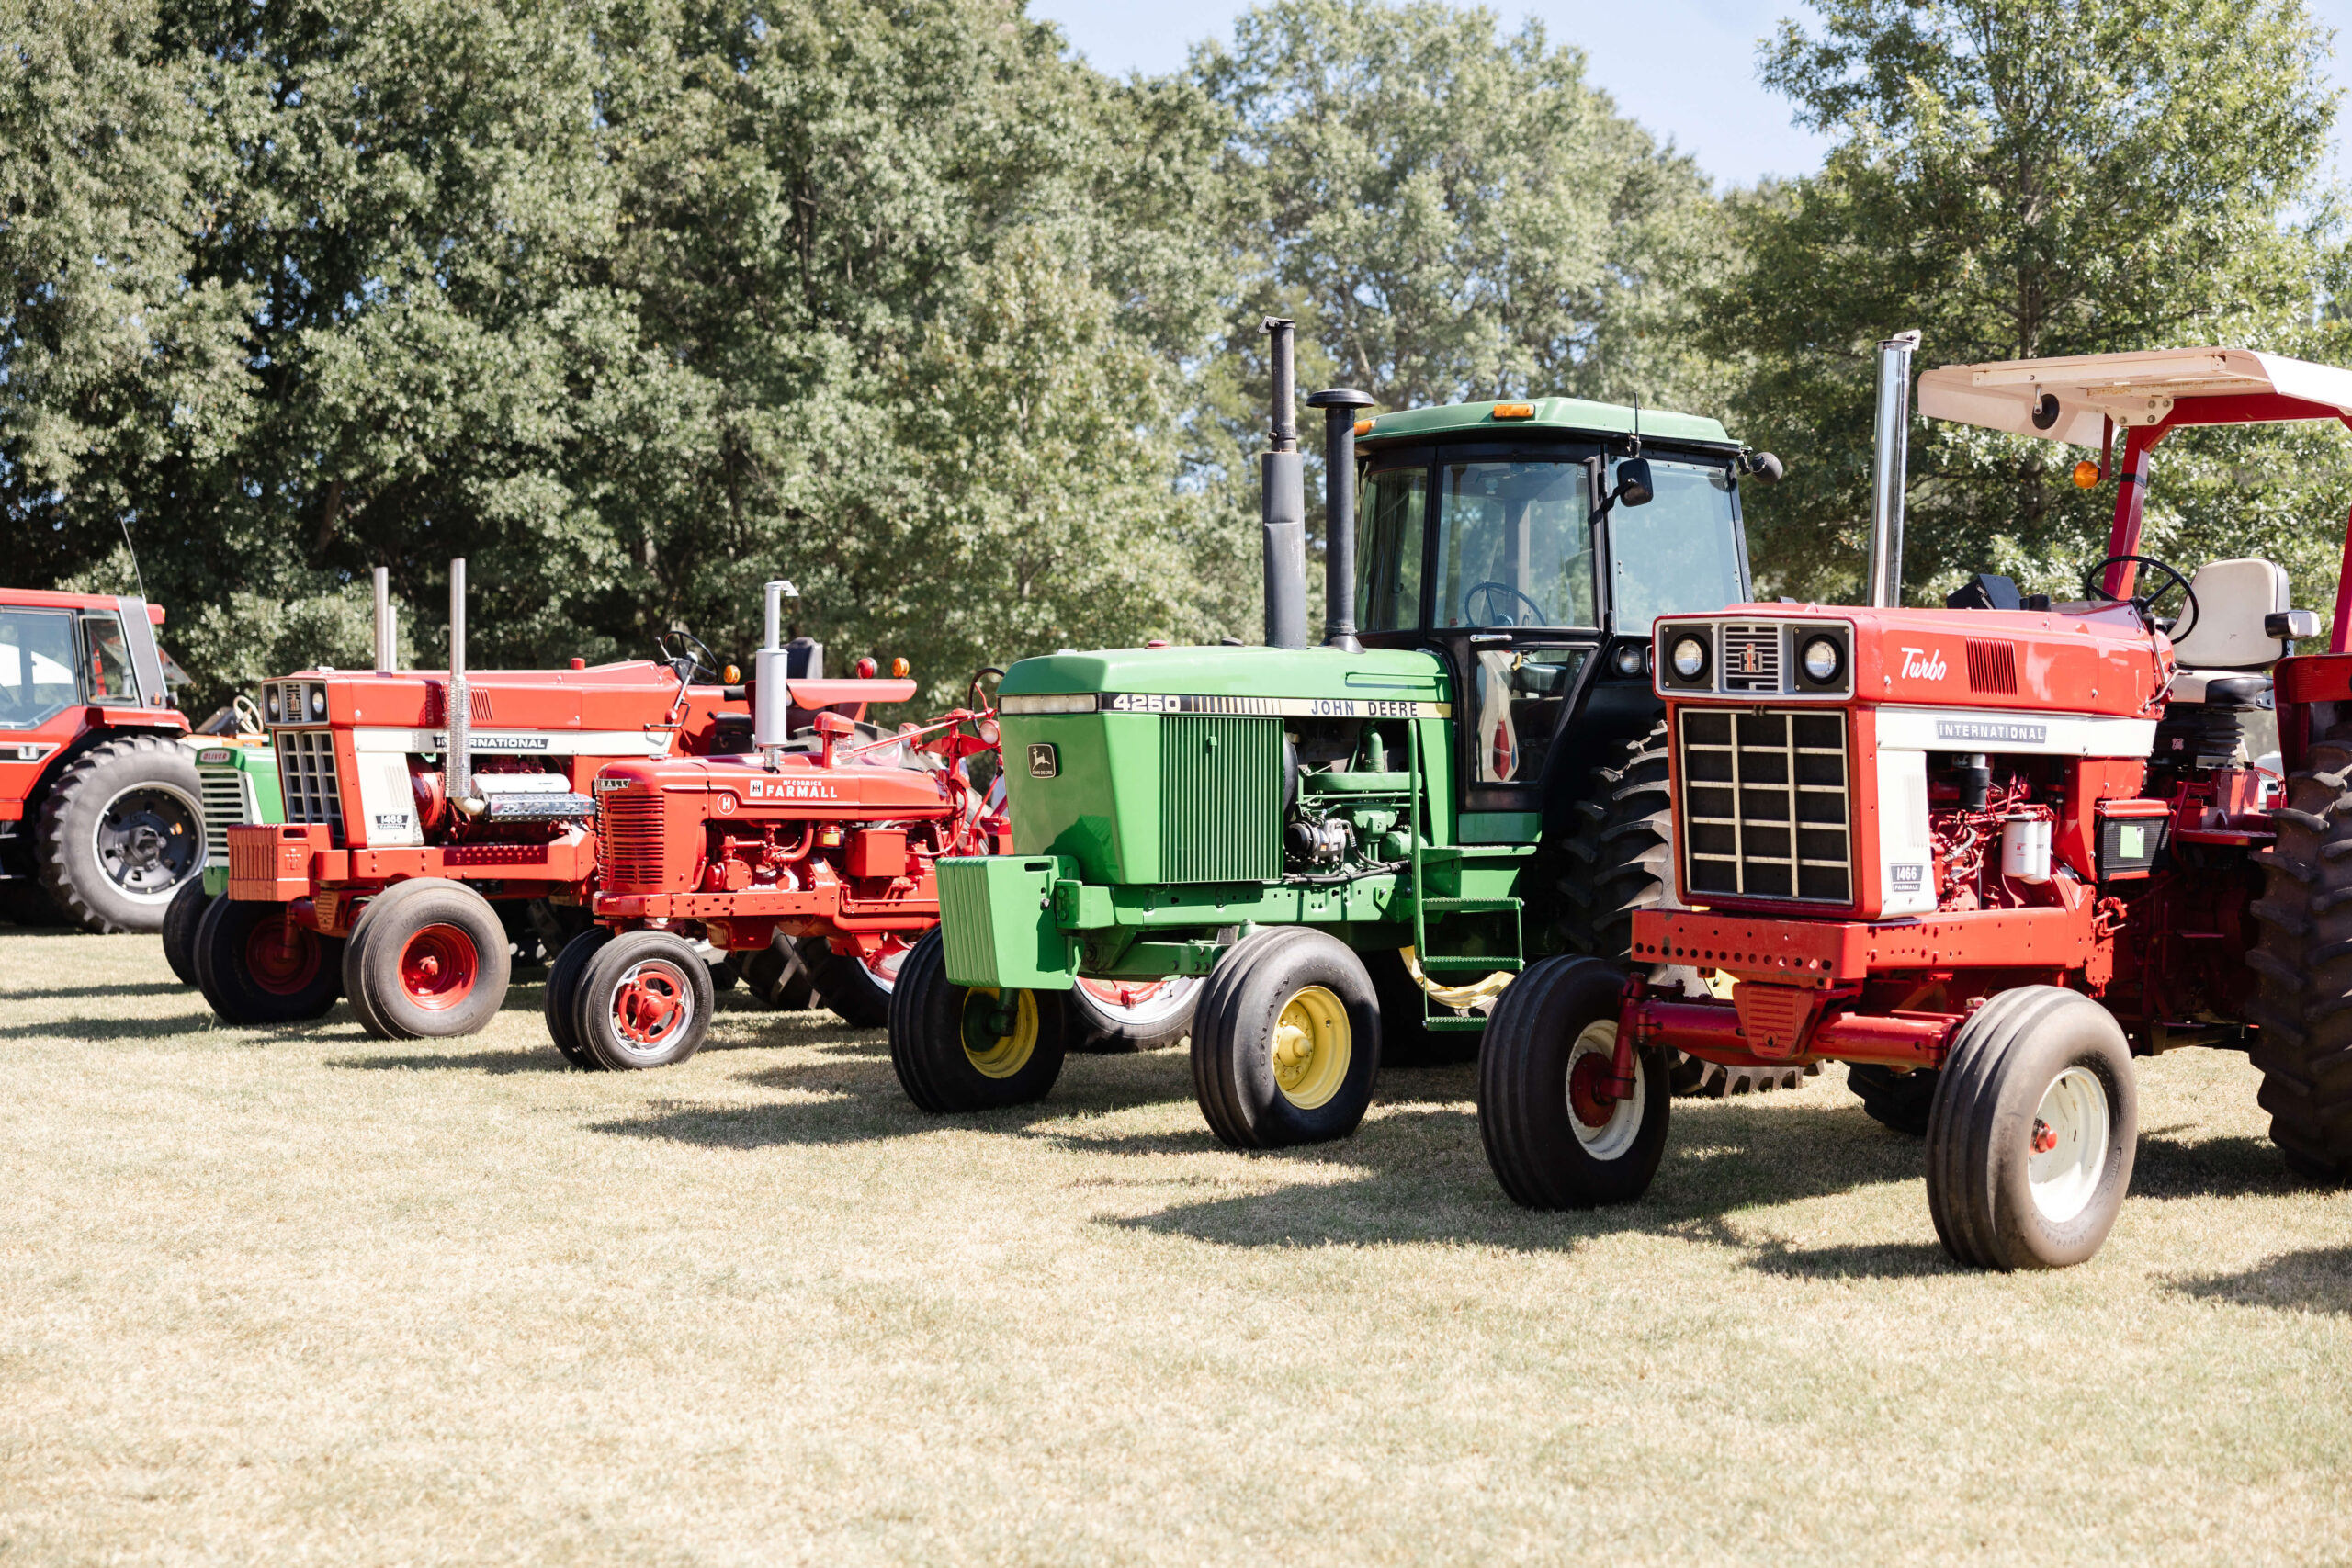 Four tractors lined up for tractor pull event